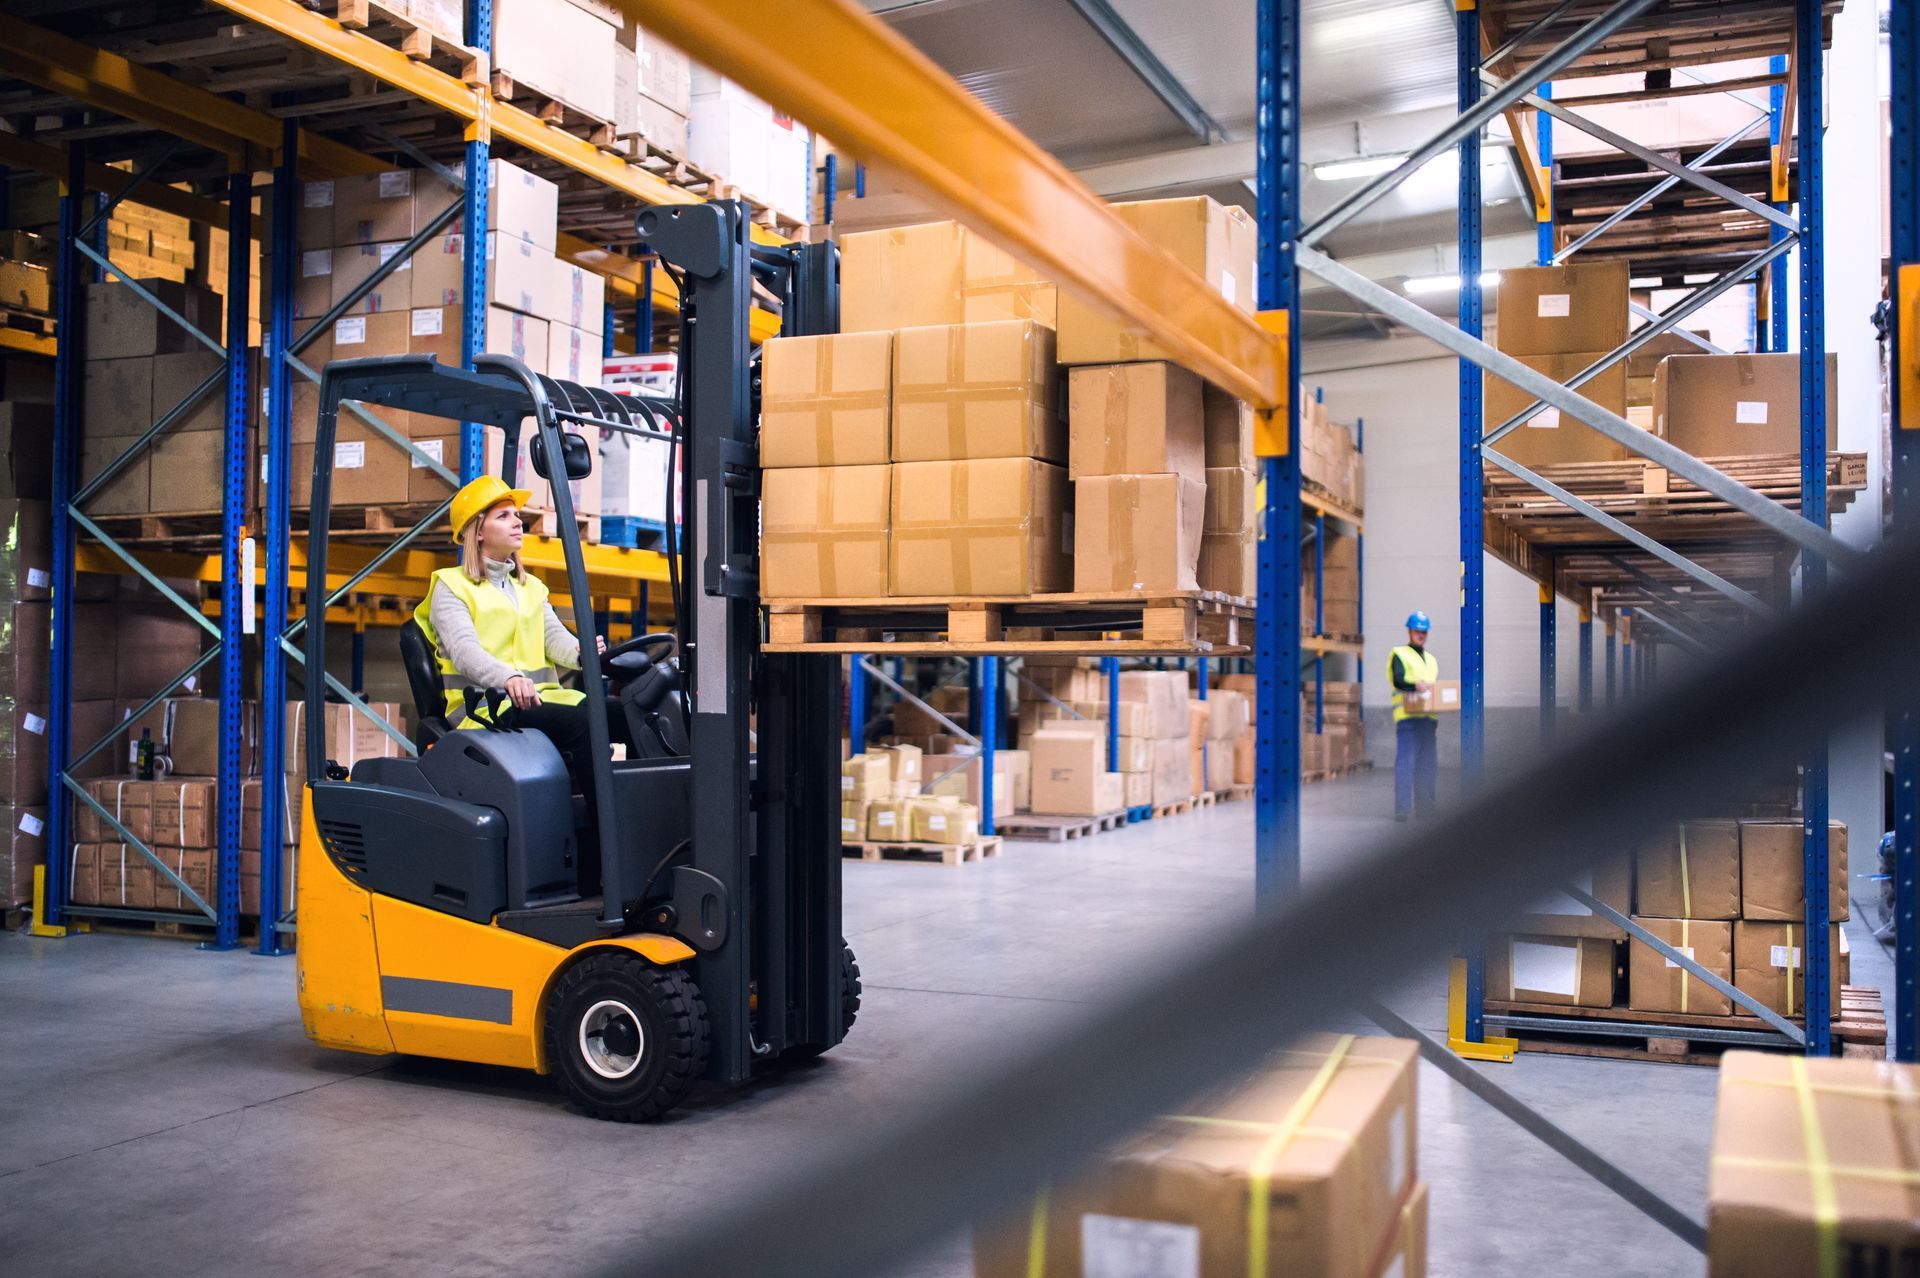 A man is driving a forklift in a warehouse filled with boxes.